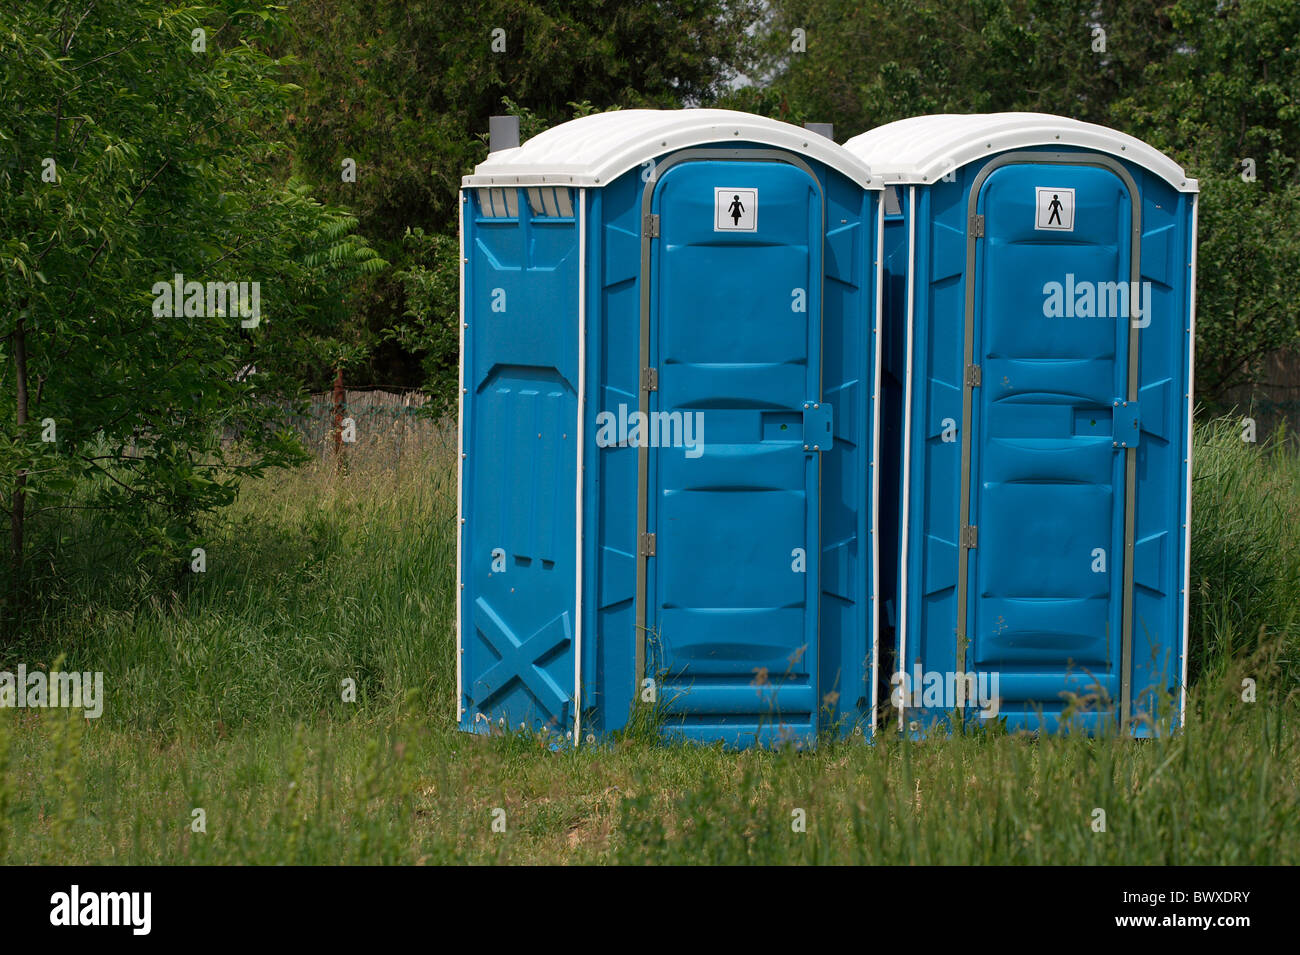 Blue mobile toilet cabins in an outdoor scene Stock Photo